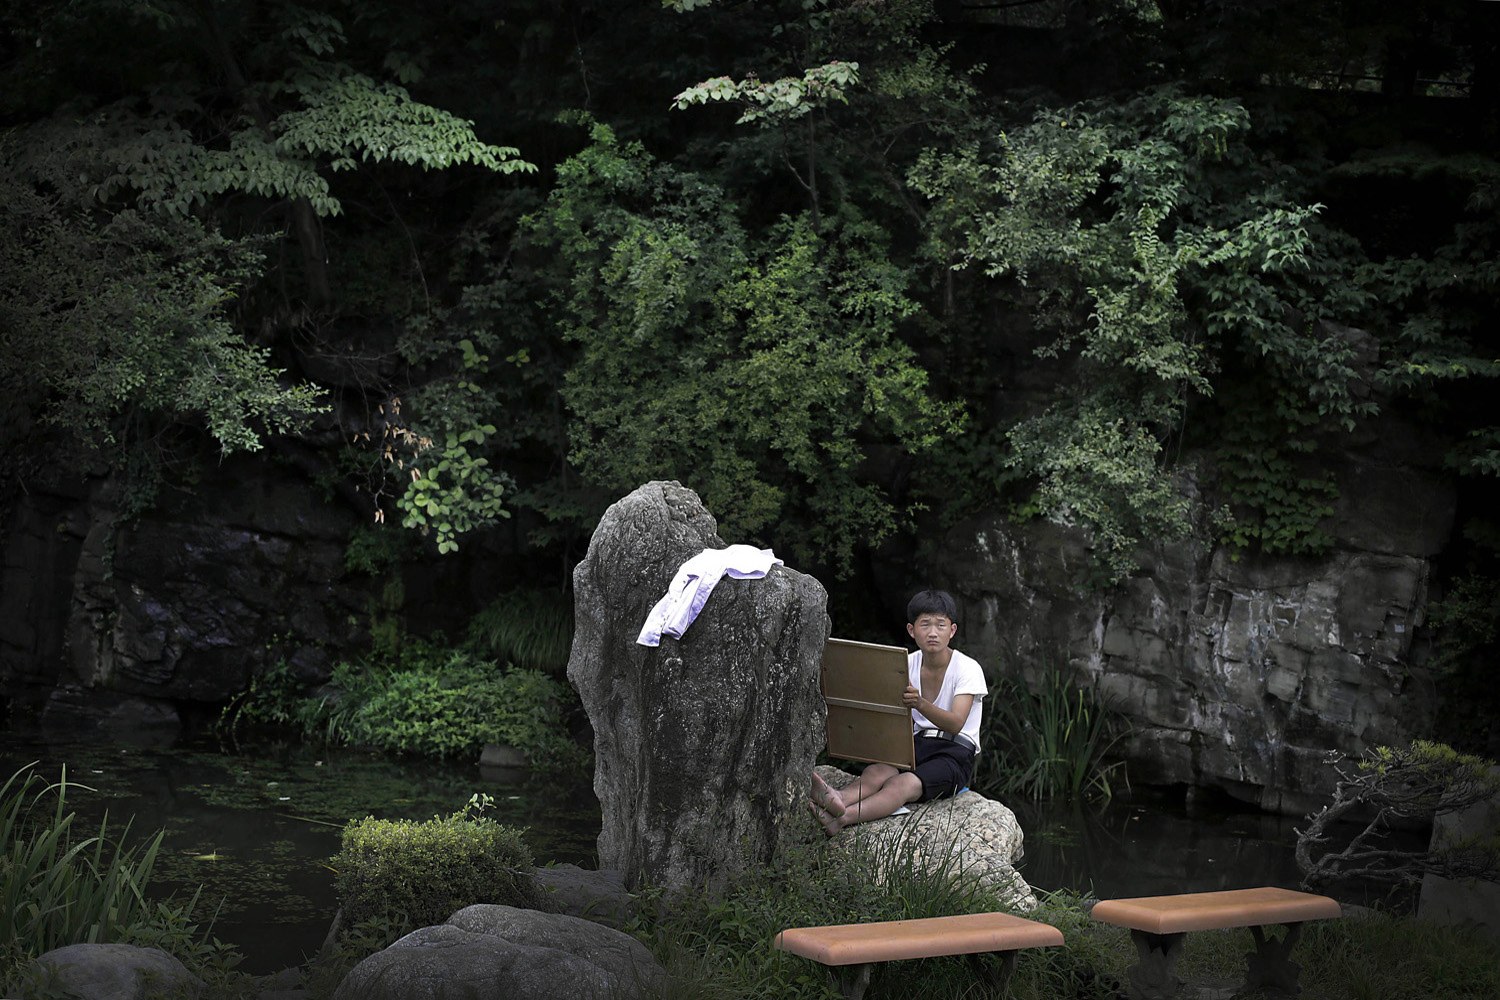 A boy sits on a rock as he sketches at the Moranbong (Moran Hill) in Pyongyang, Jul. 31, 2014. With the heat and humidity of summer setting in, one of the most popular locations is Moranbong, a short walk from Kim Il Sung Square, which is known for its shady walking paths, vistas of the city and grassy fields.